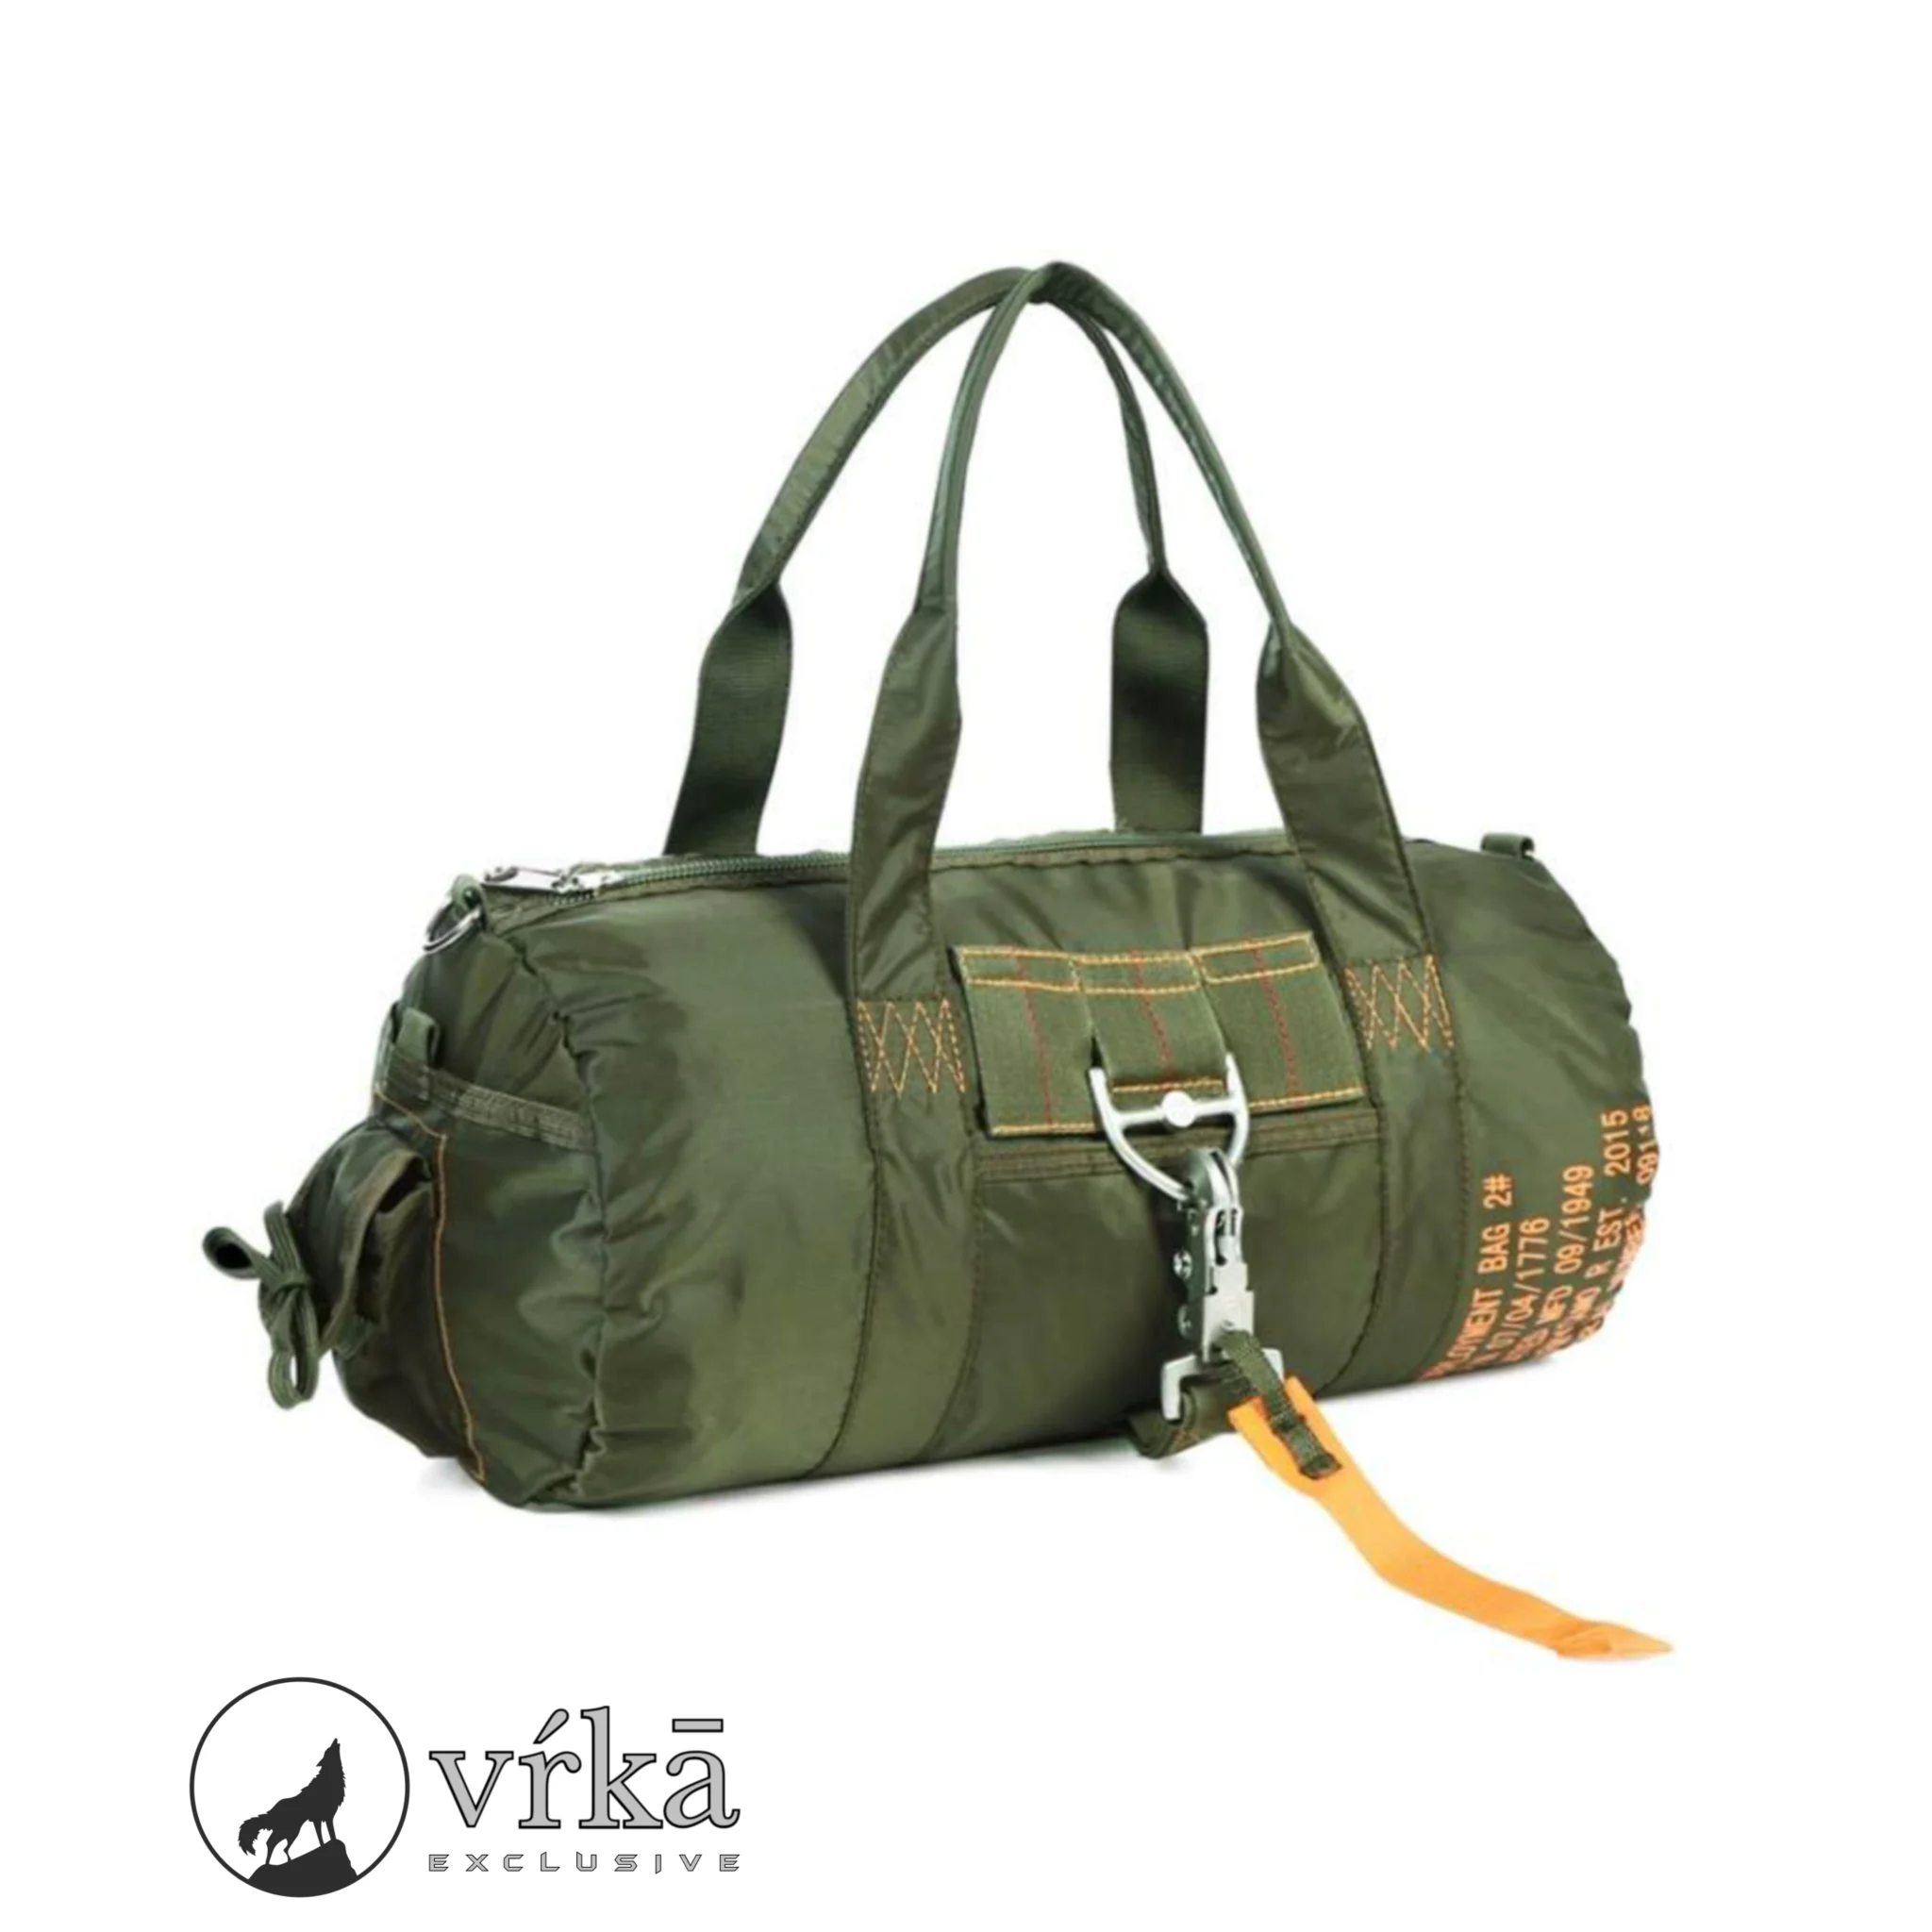 Featured image for “Parachute Deployment Bag : Compact Duffle Bag”